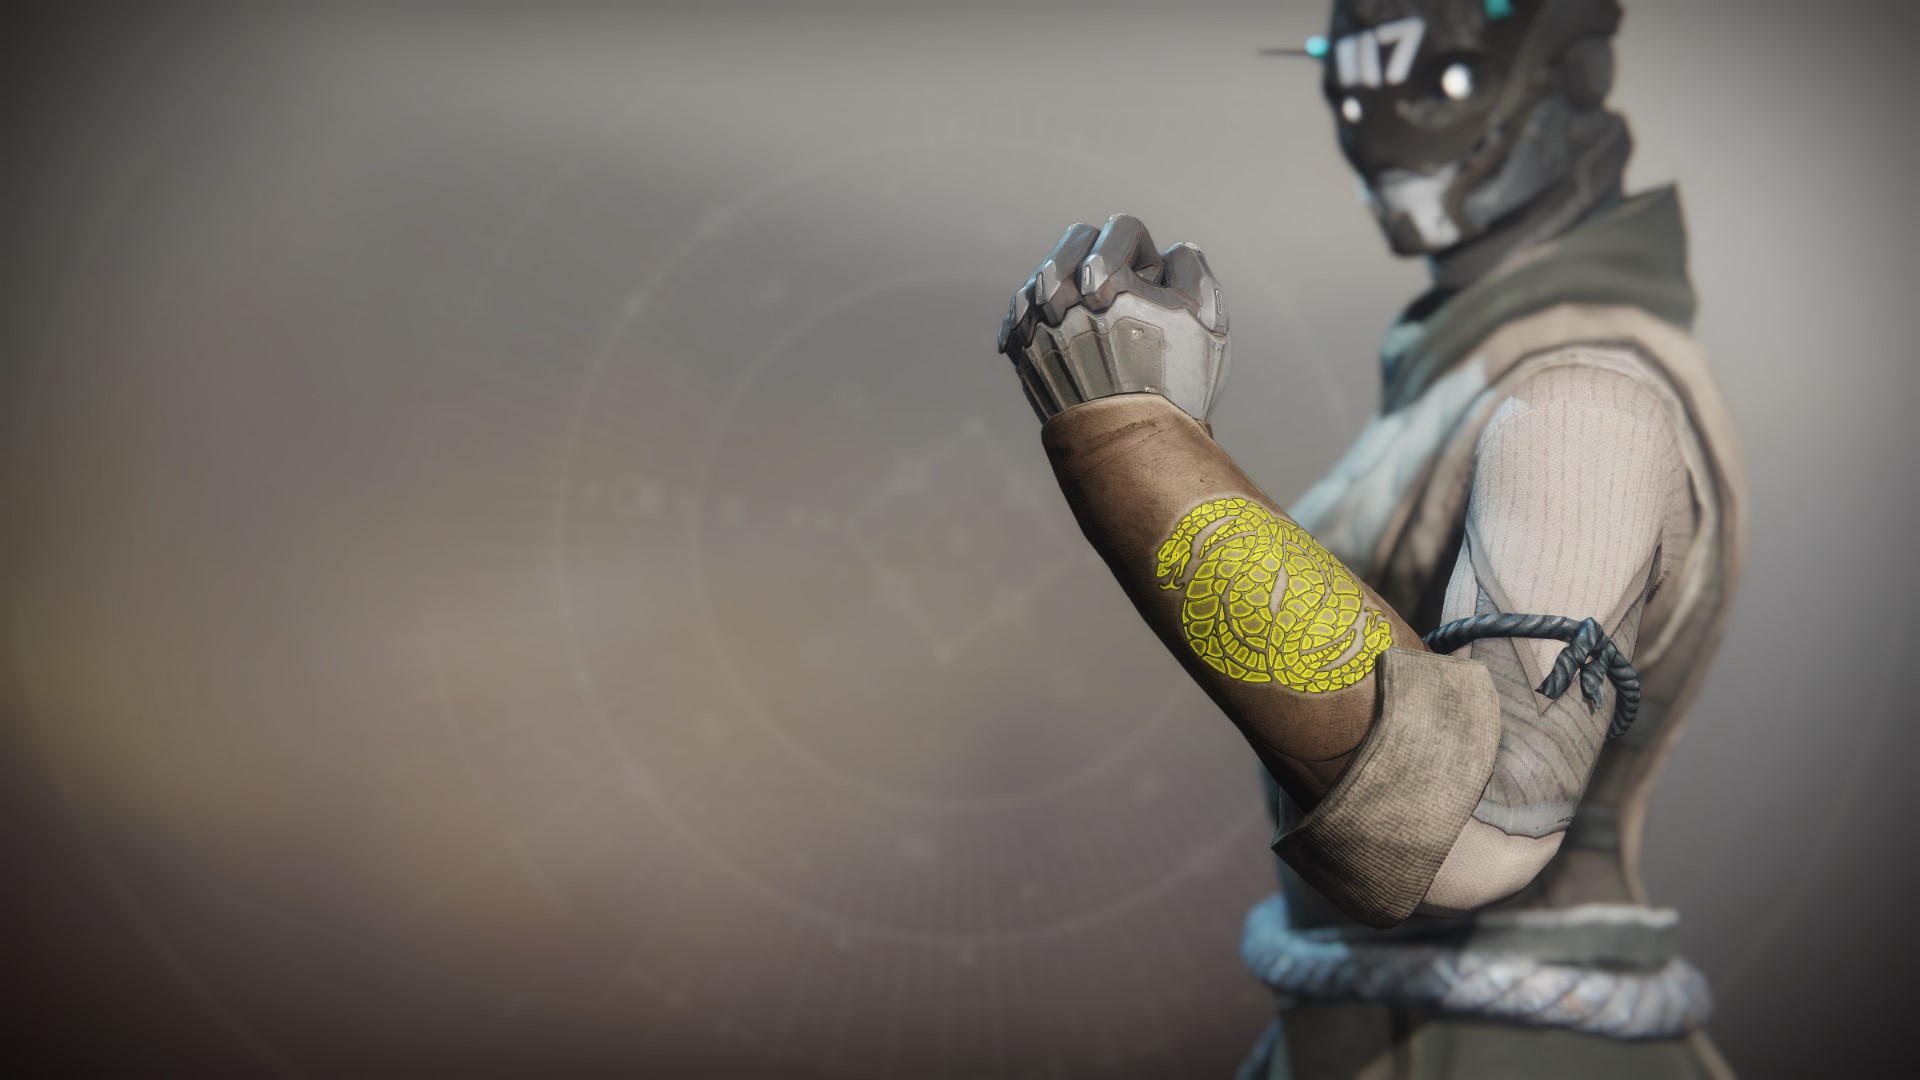 An in-game render of the Illicit Sentry Gloves.